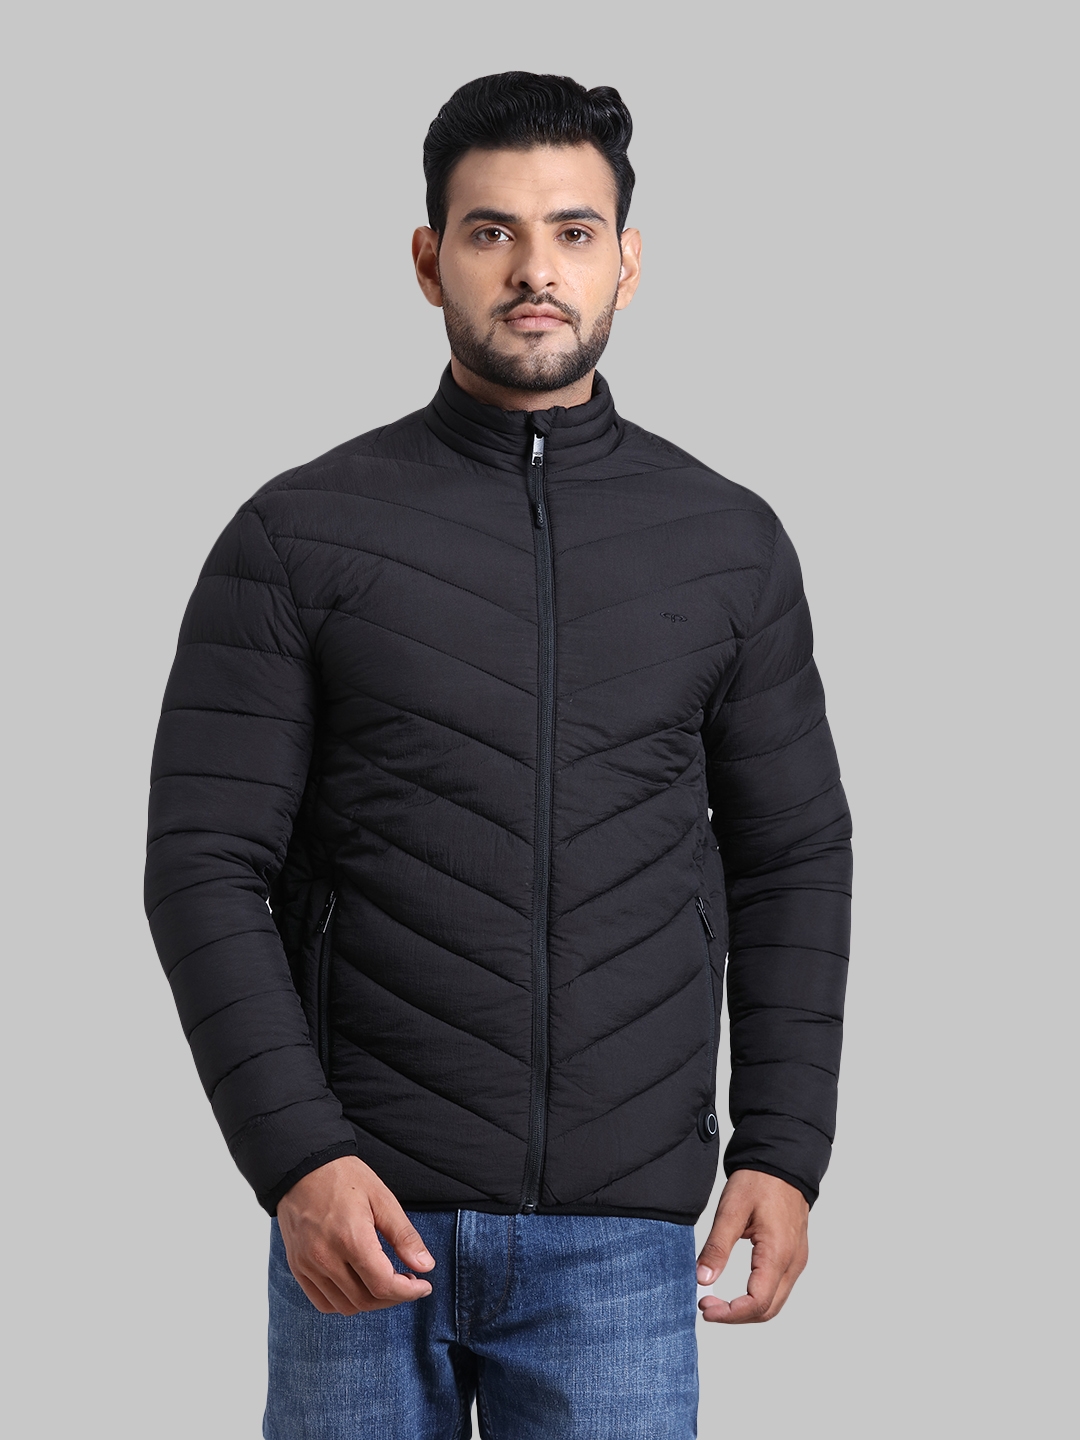 Buy ColorPlus Black Jacket - ColorPlus | Fynd - Your Everyday Fashion ...